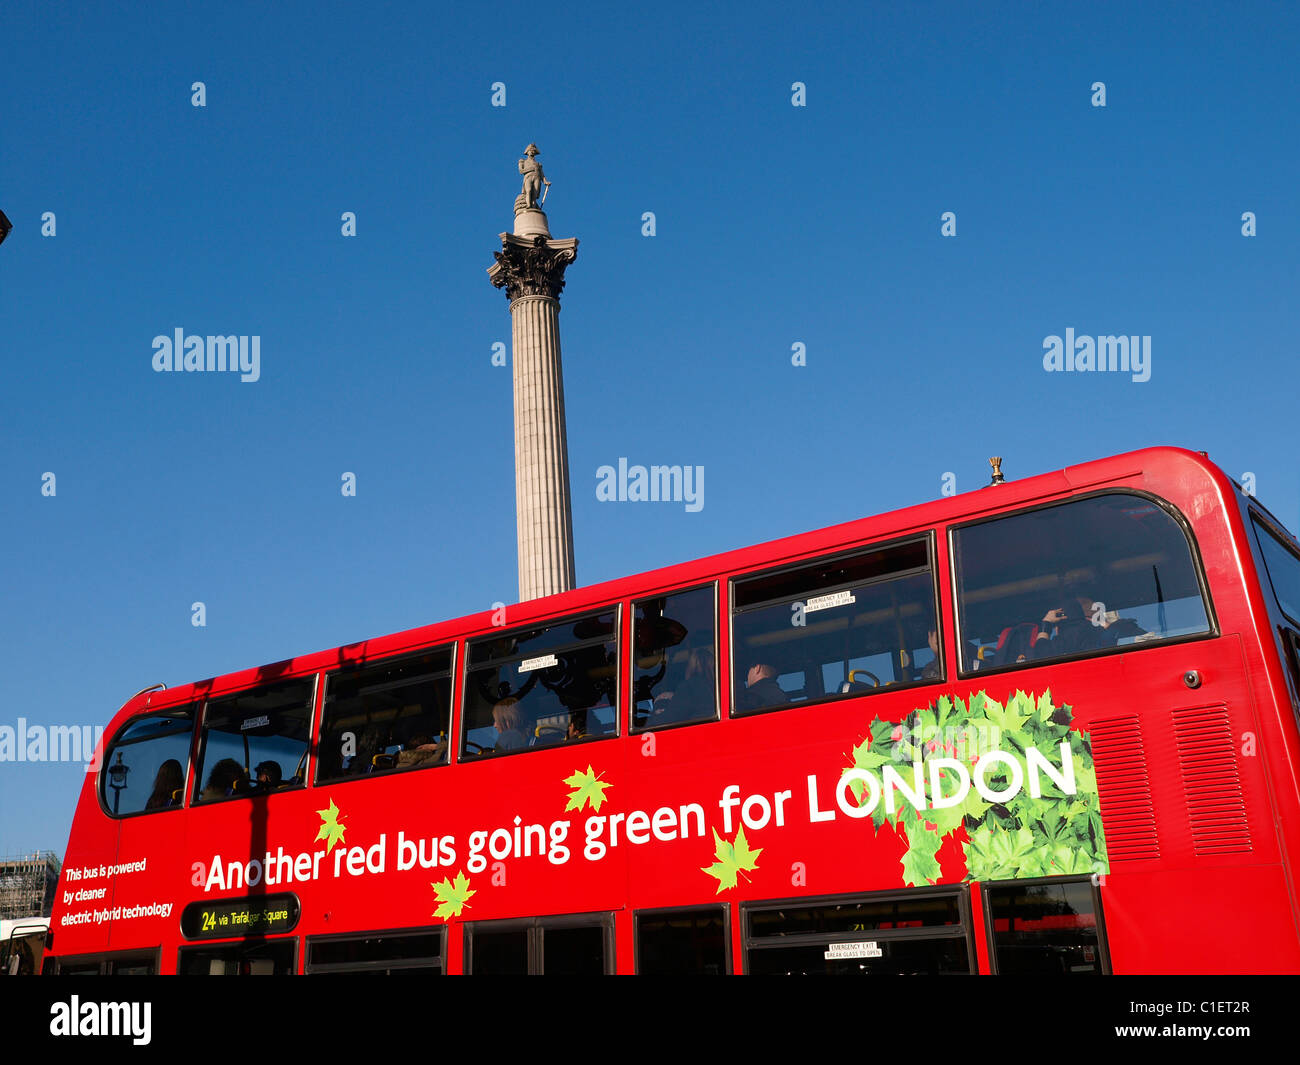 London hybrid double-decker bus 'Another red bus going green for London' Stock Photo